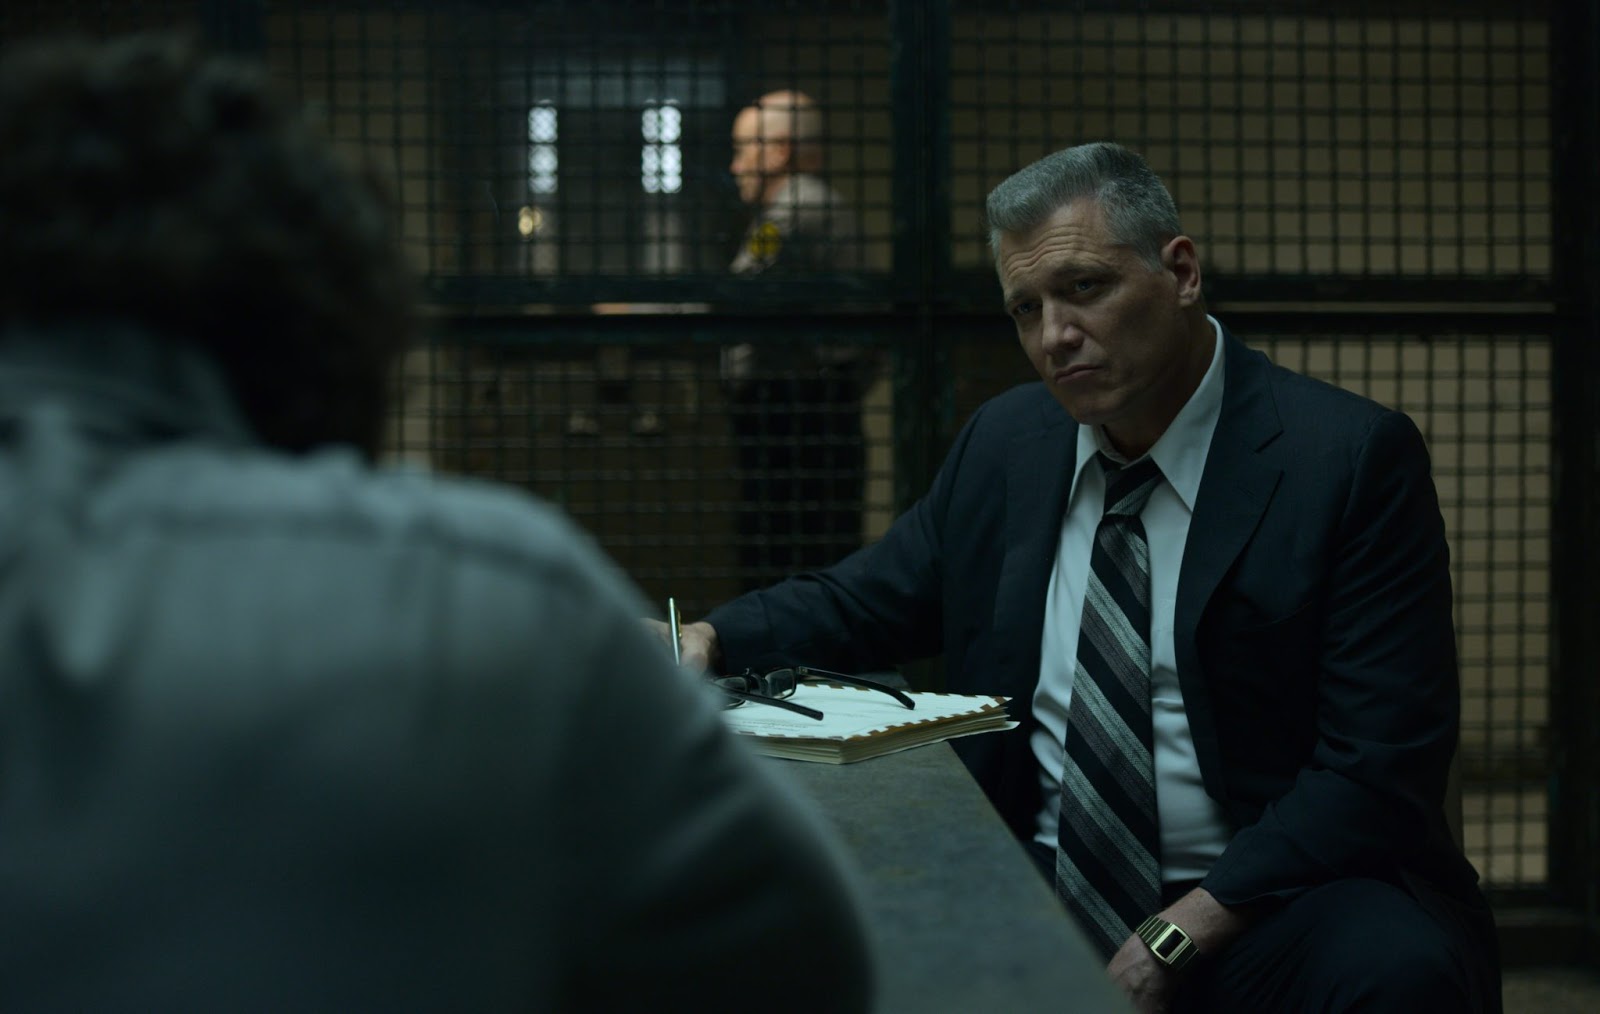 MINDHUNTER Season 2 Trailers, Images and Poster | The Entertainment Factor